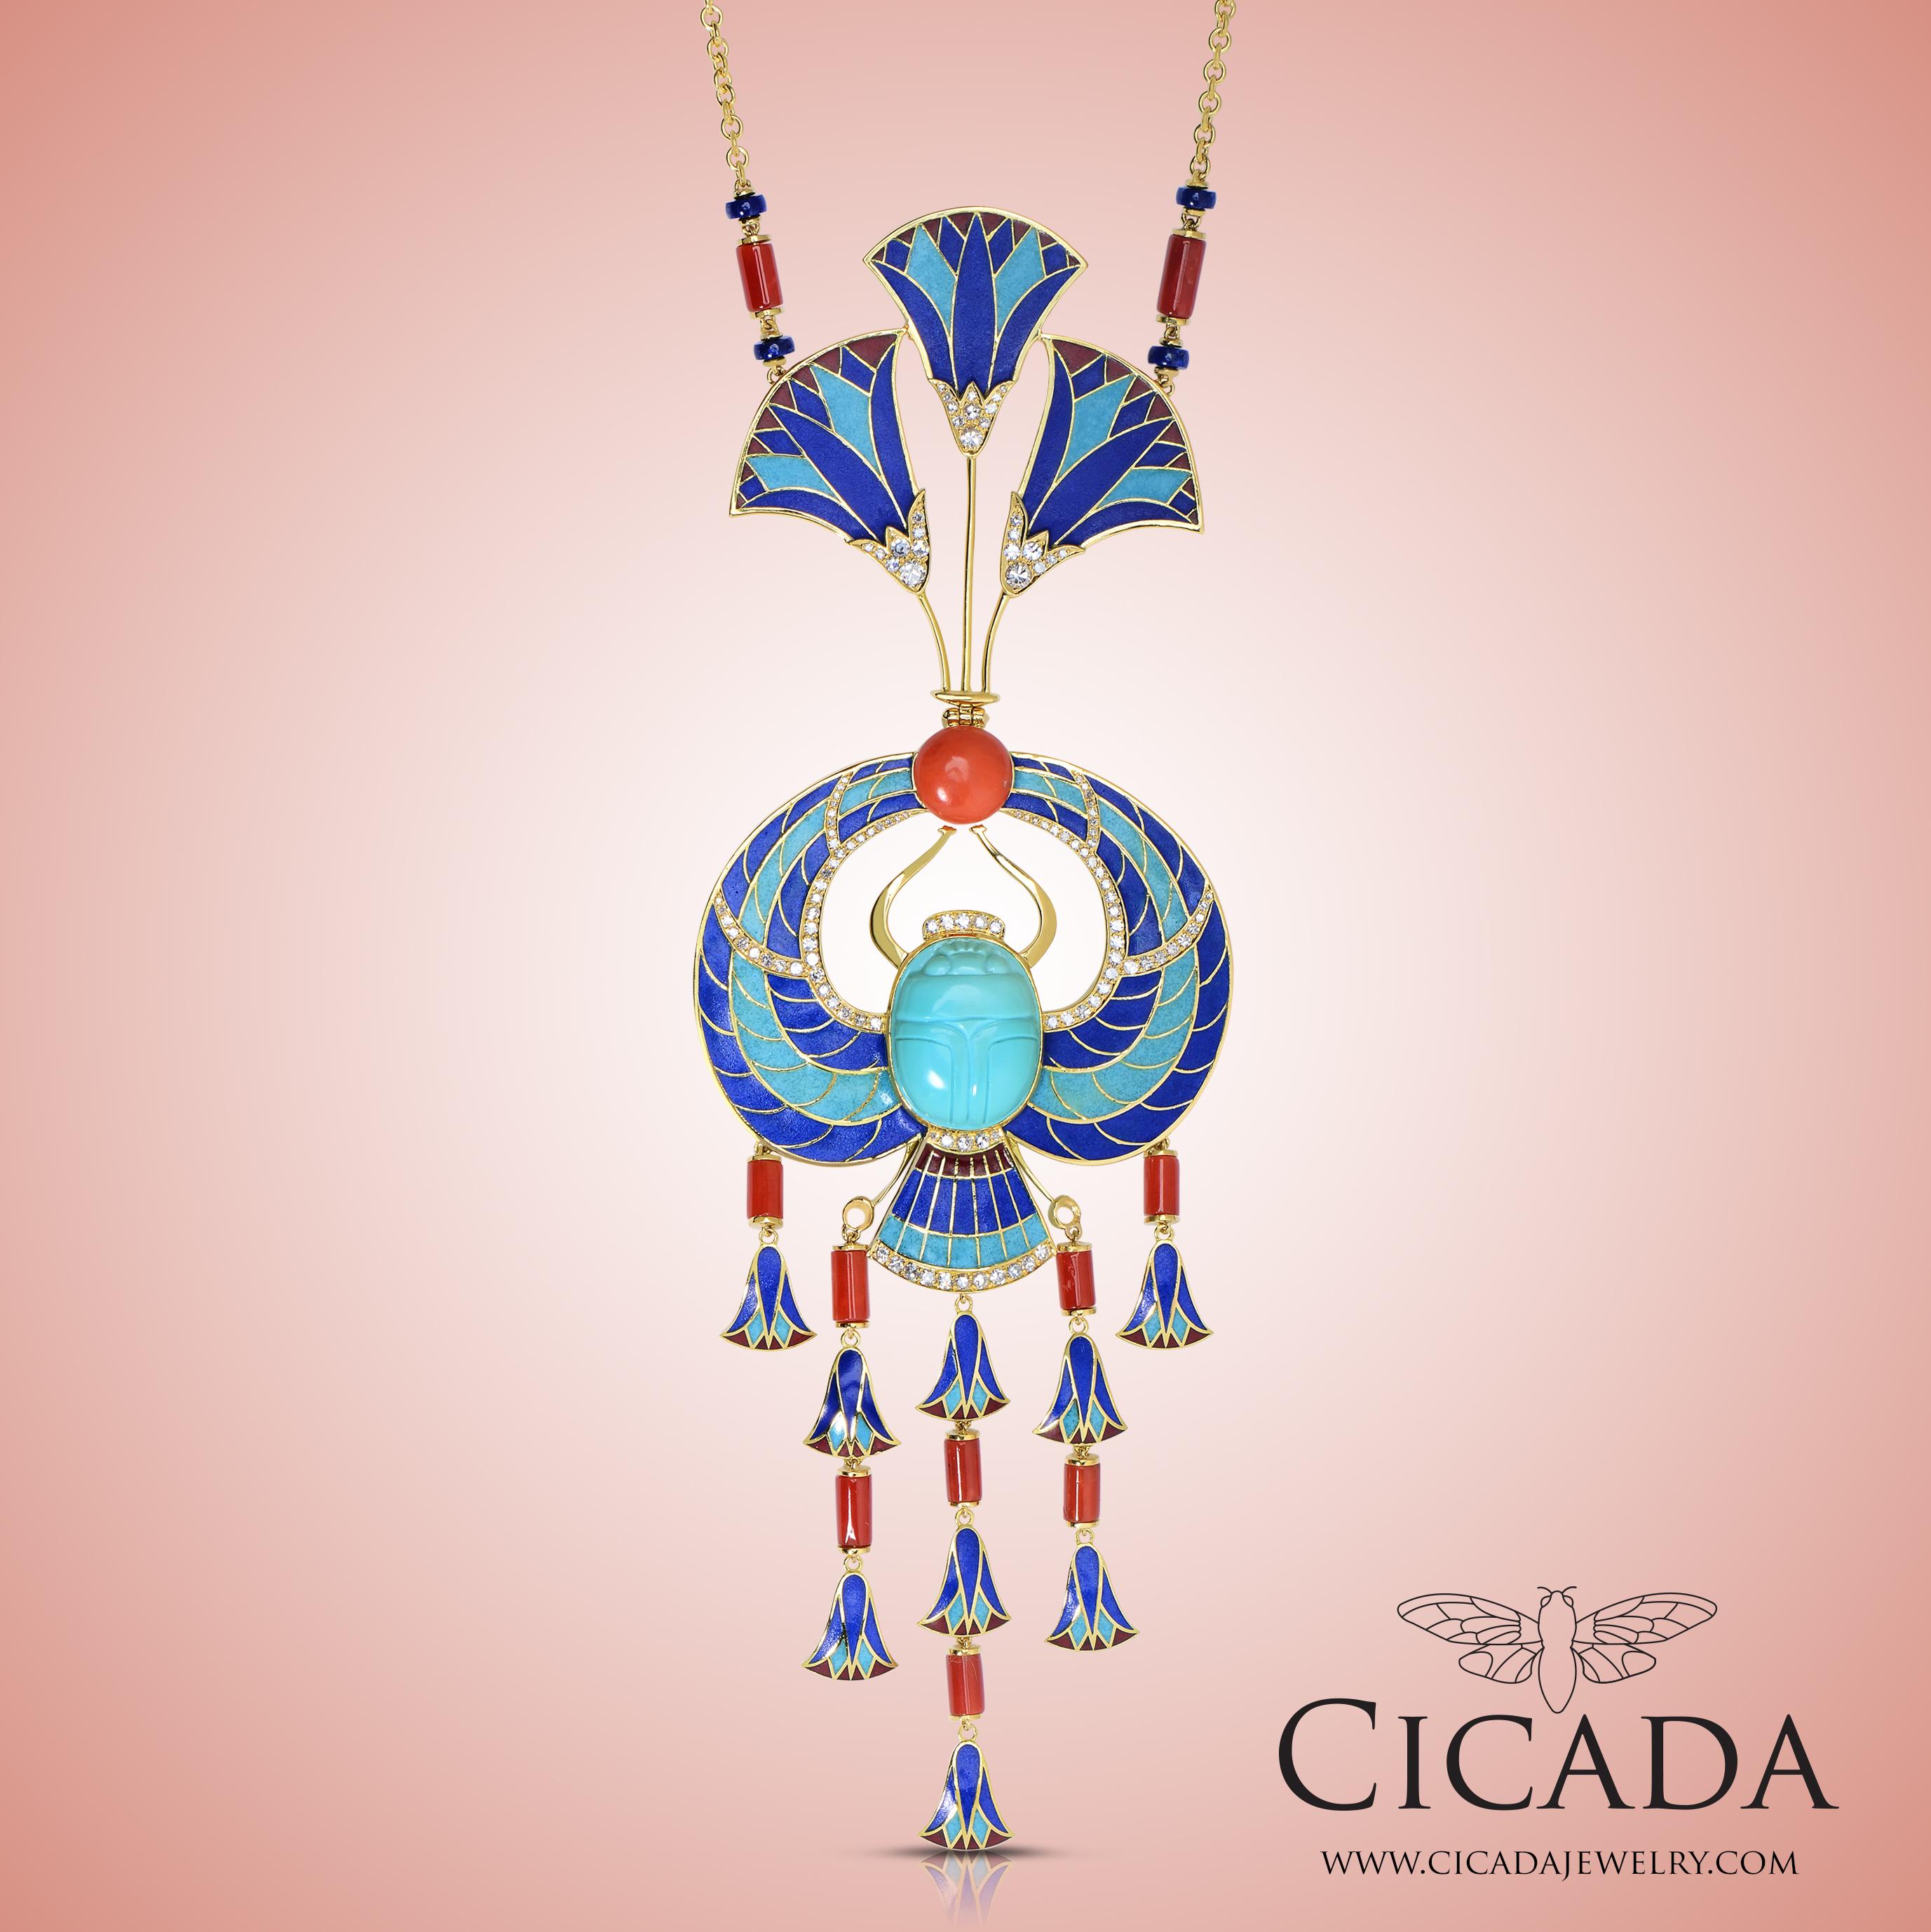 Part of the Egyptian Revival Collection by Cicada Jewelry, this beautiful gold 18k Yellow Gold Necklace features a hand carved turquoise center, with corals and highlighted by single cut diamonds. This necklace features enamel work in a matte